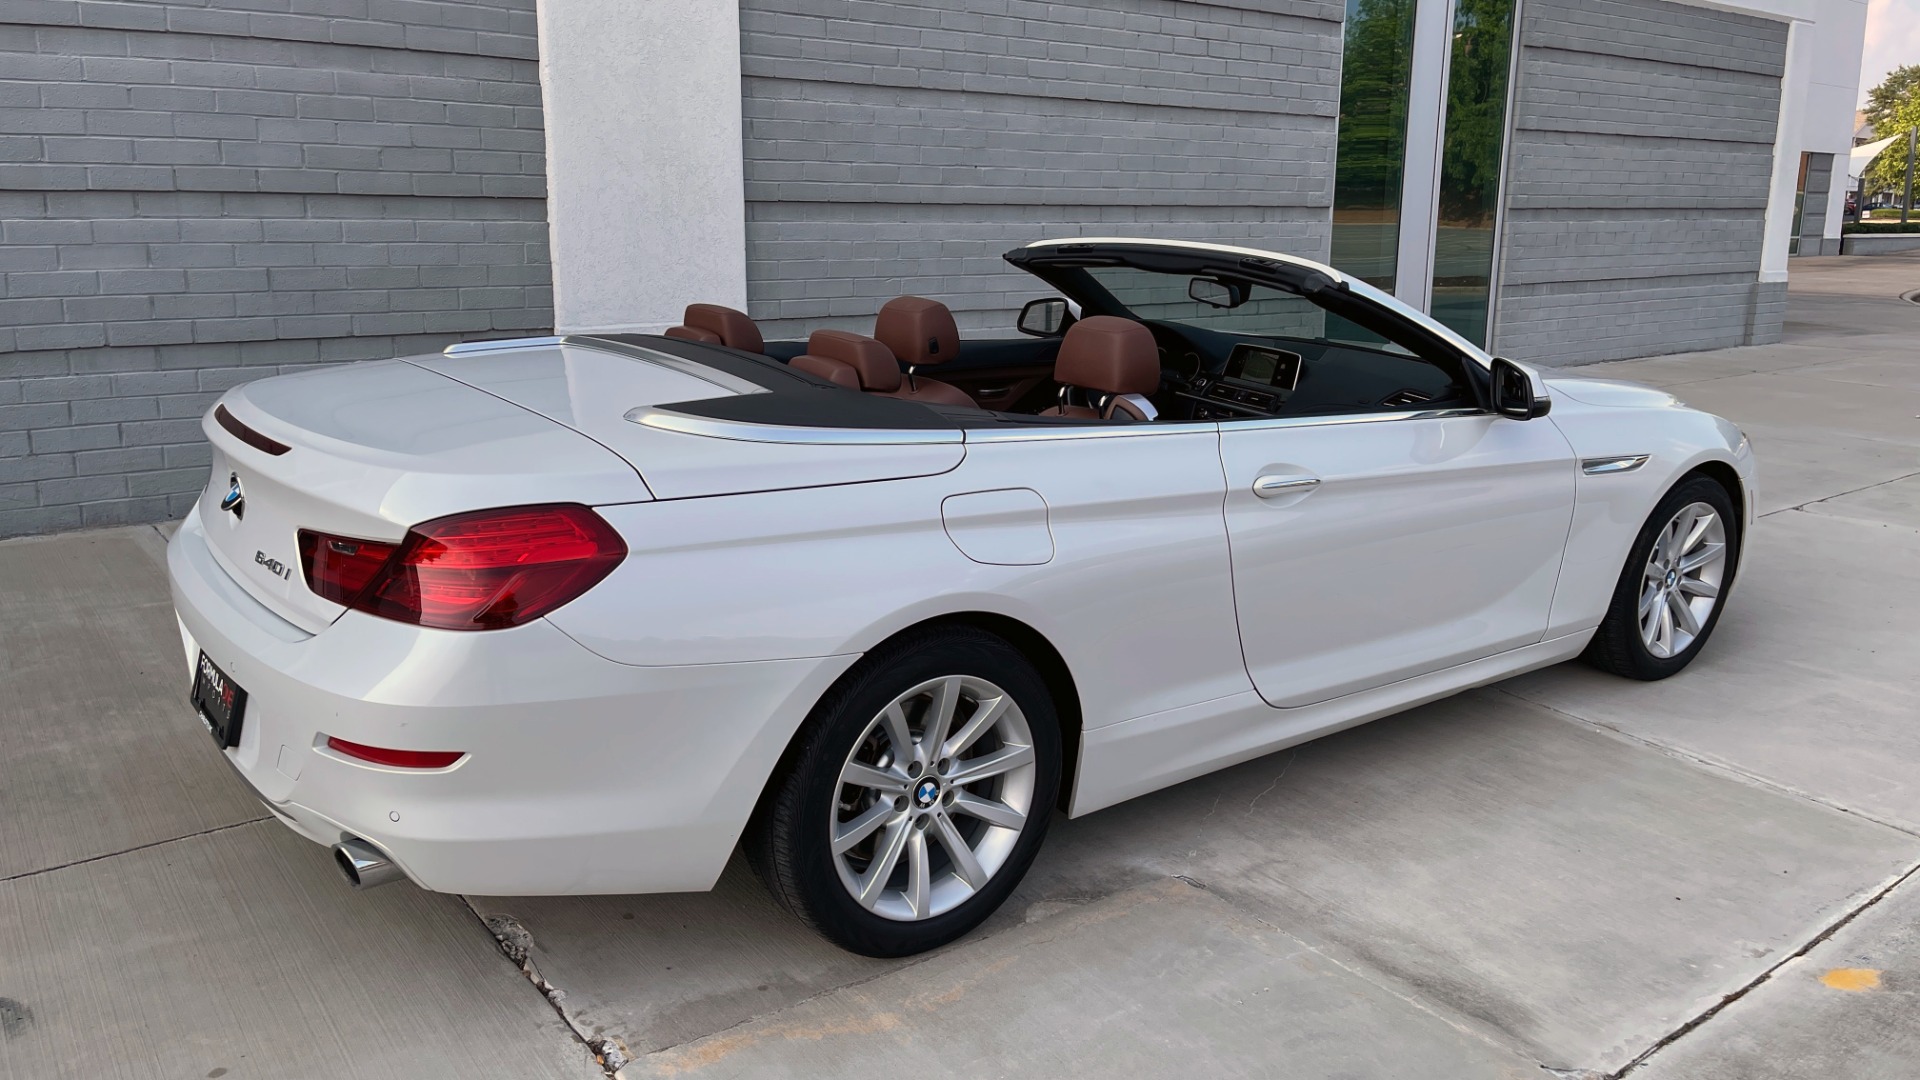 Used 2016 BMW 6 SERIES 640I CONVERTIBLE / 3.0L I6 / 8-SPD AUTO / RWD / NAV / REARVIEW for sale Sold at Formula Imports in Charlotte NC 28227 5